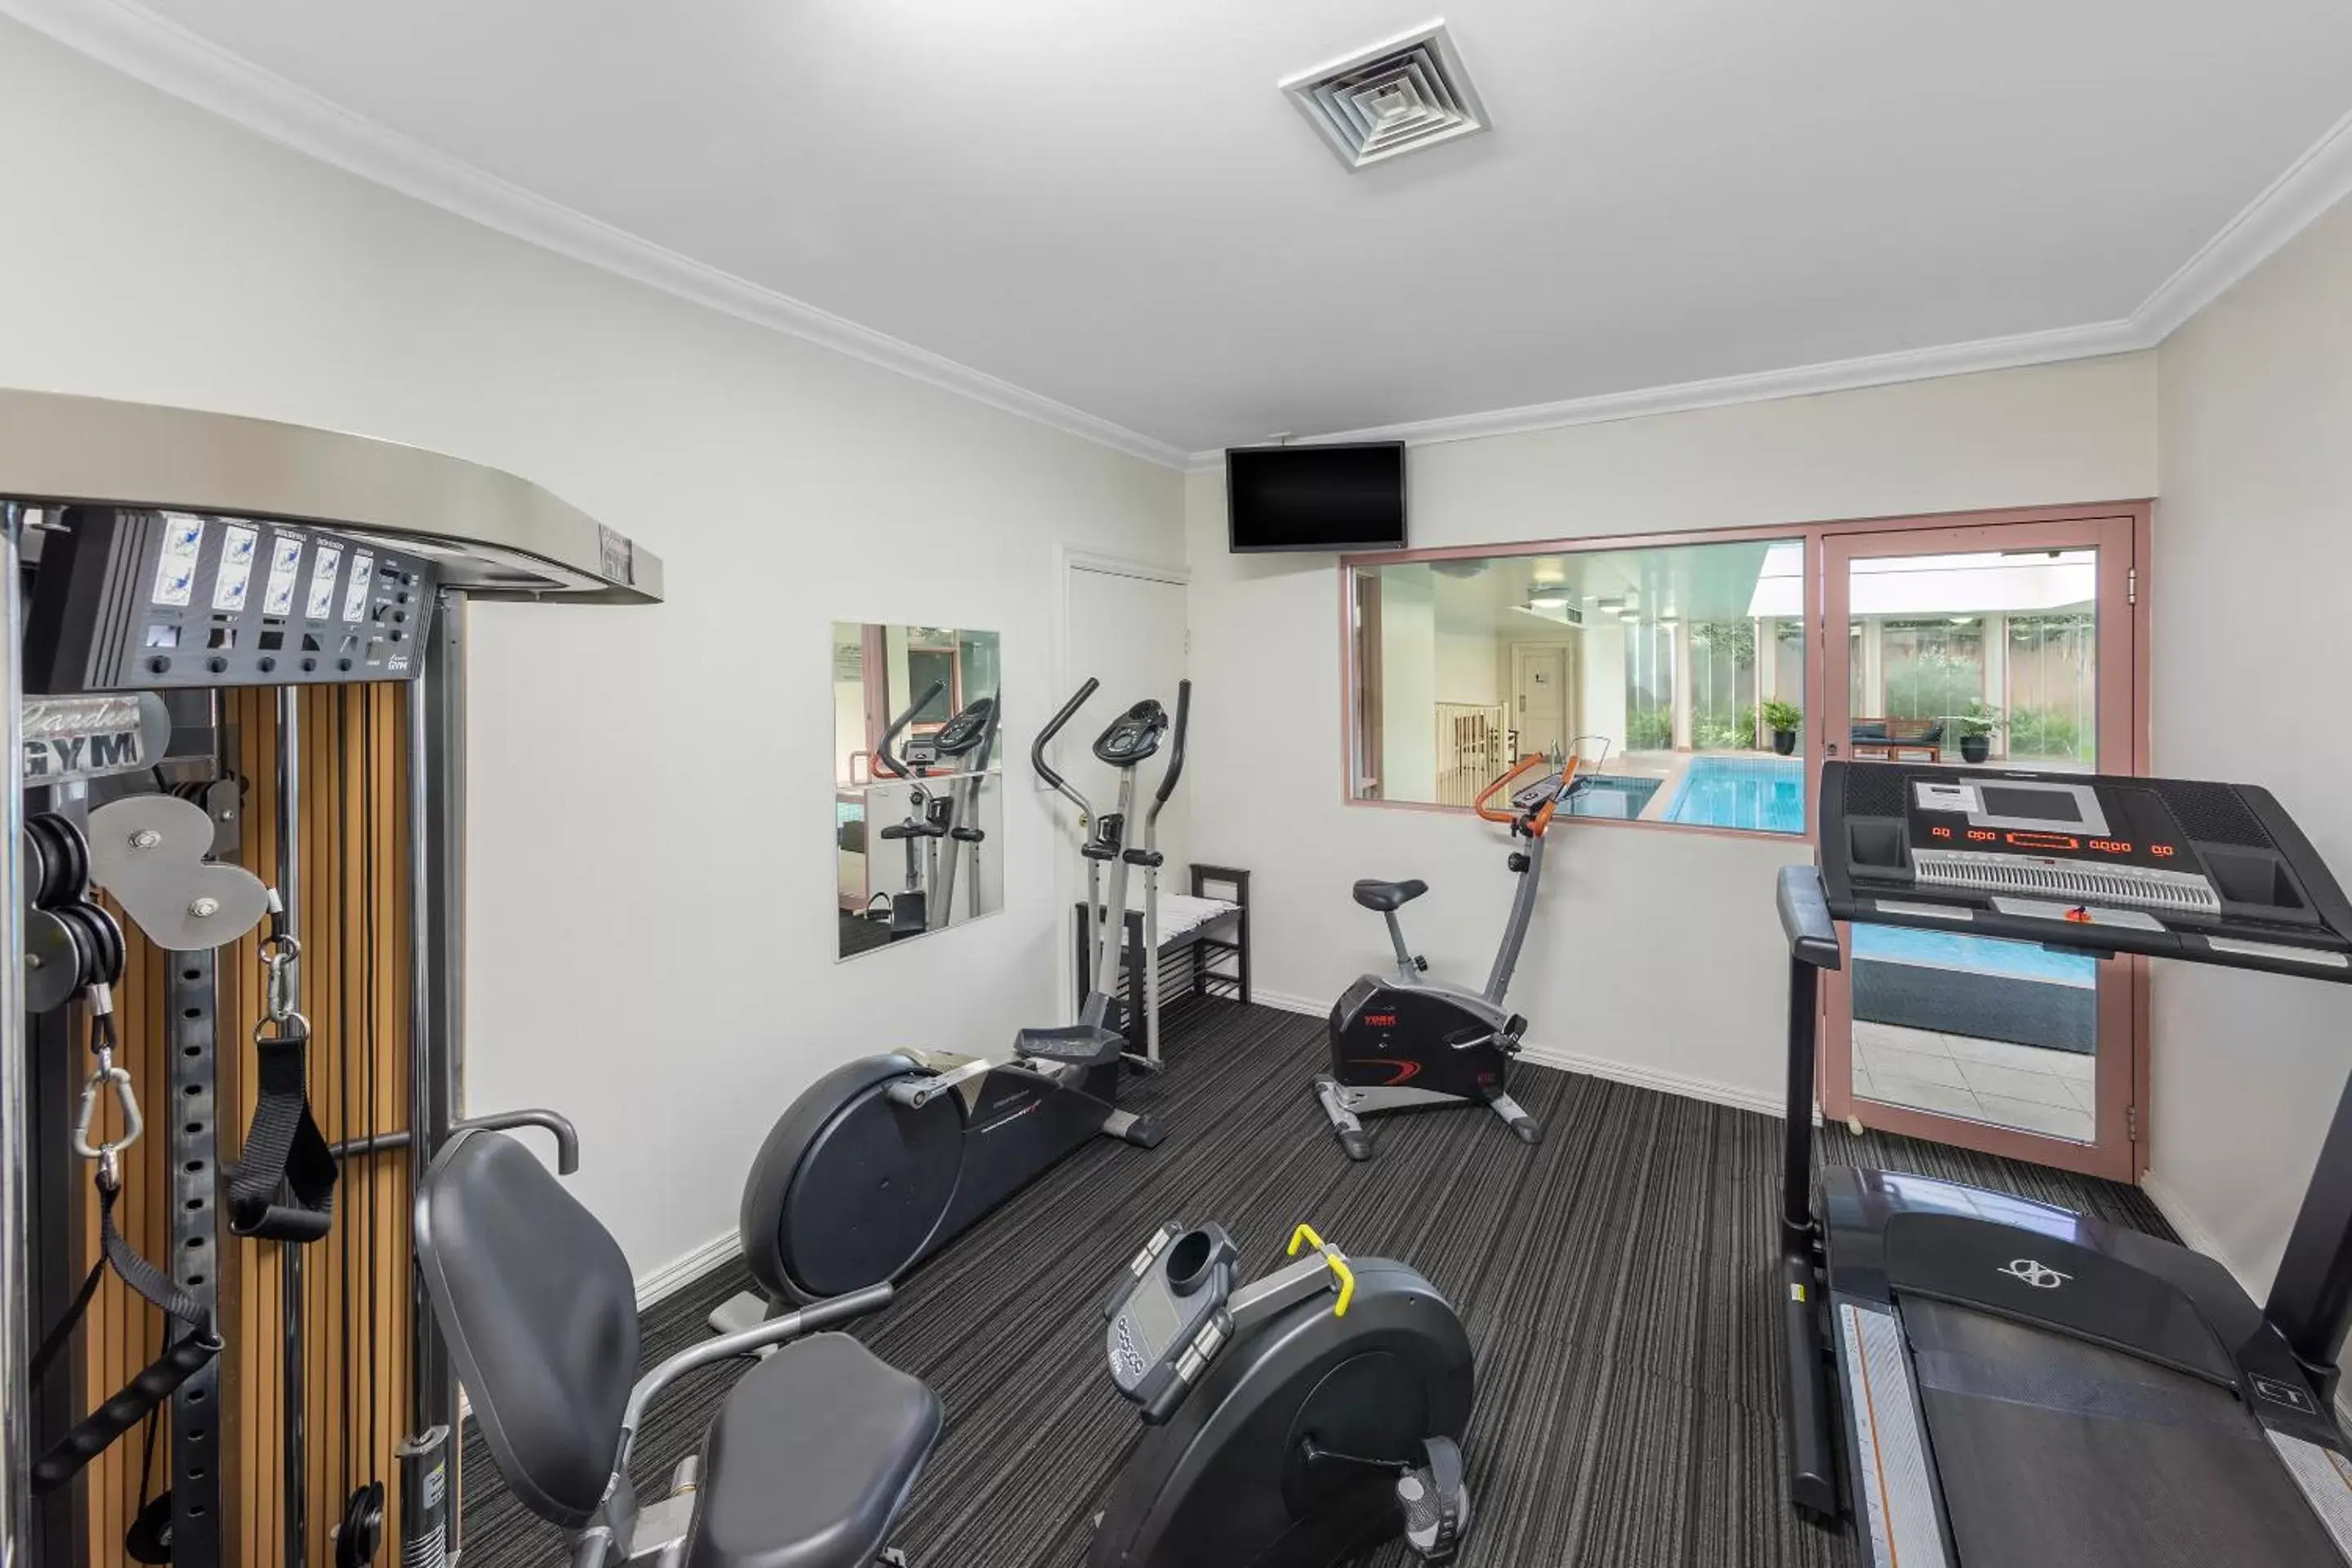 Fitness centre/facilities in Kimberley Gardens Hotel, Serviced Apartments and Serviced Villas